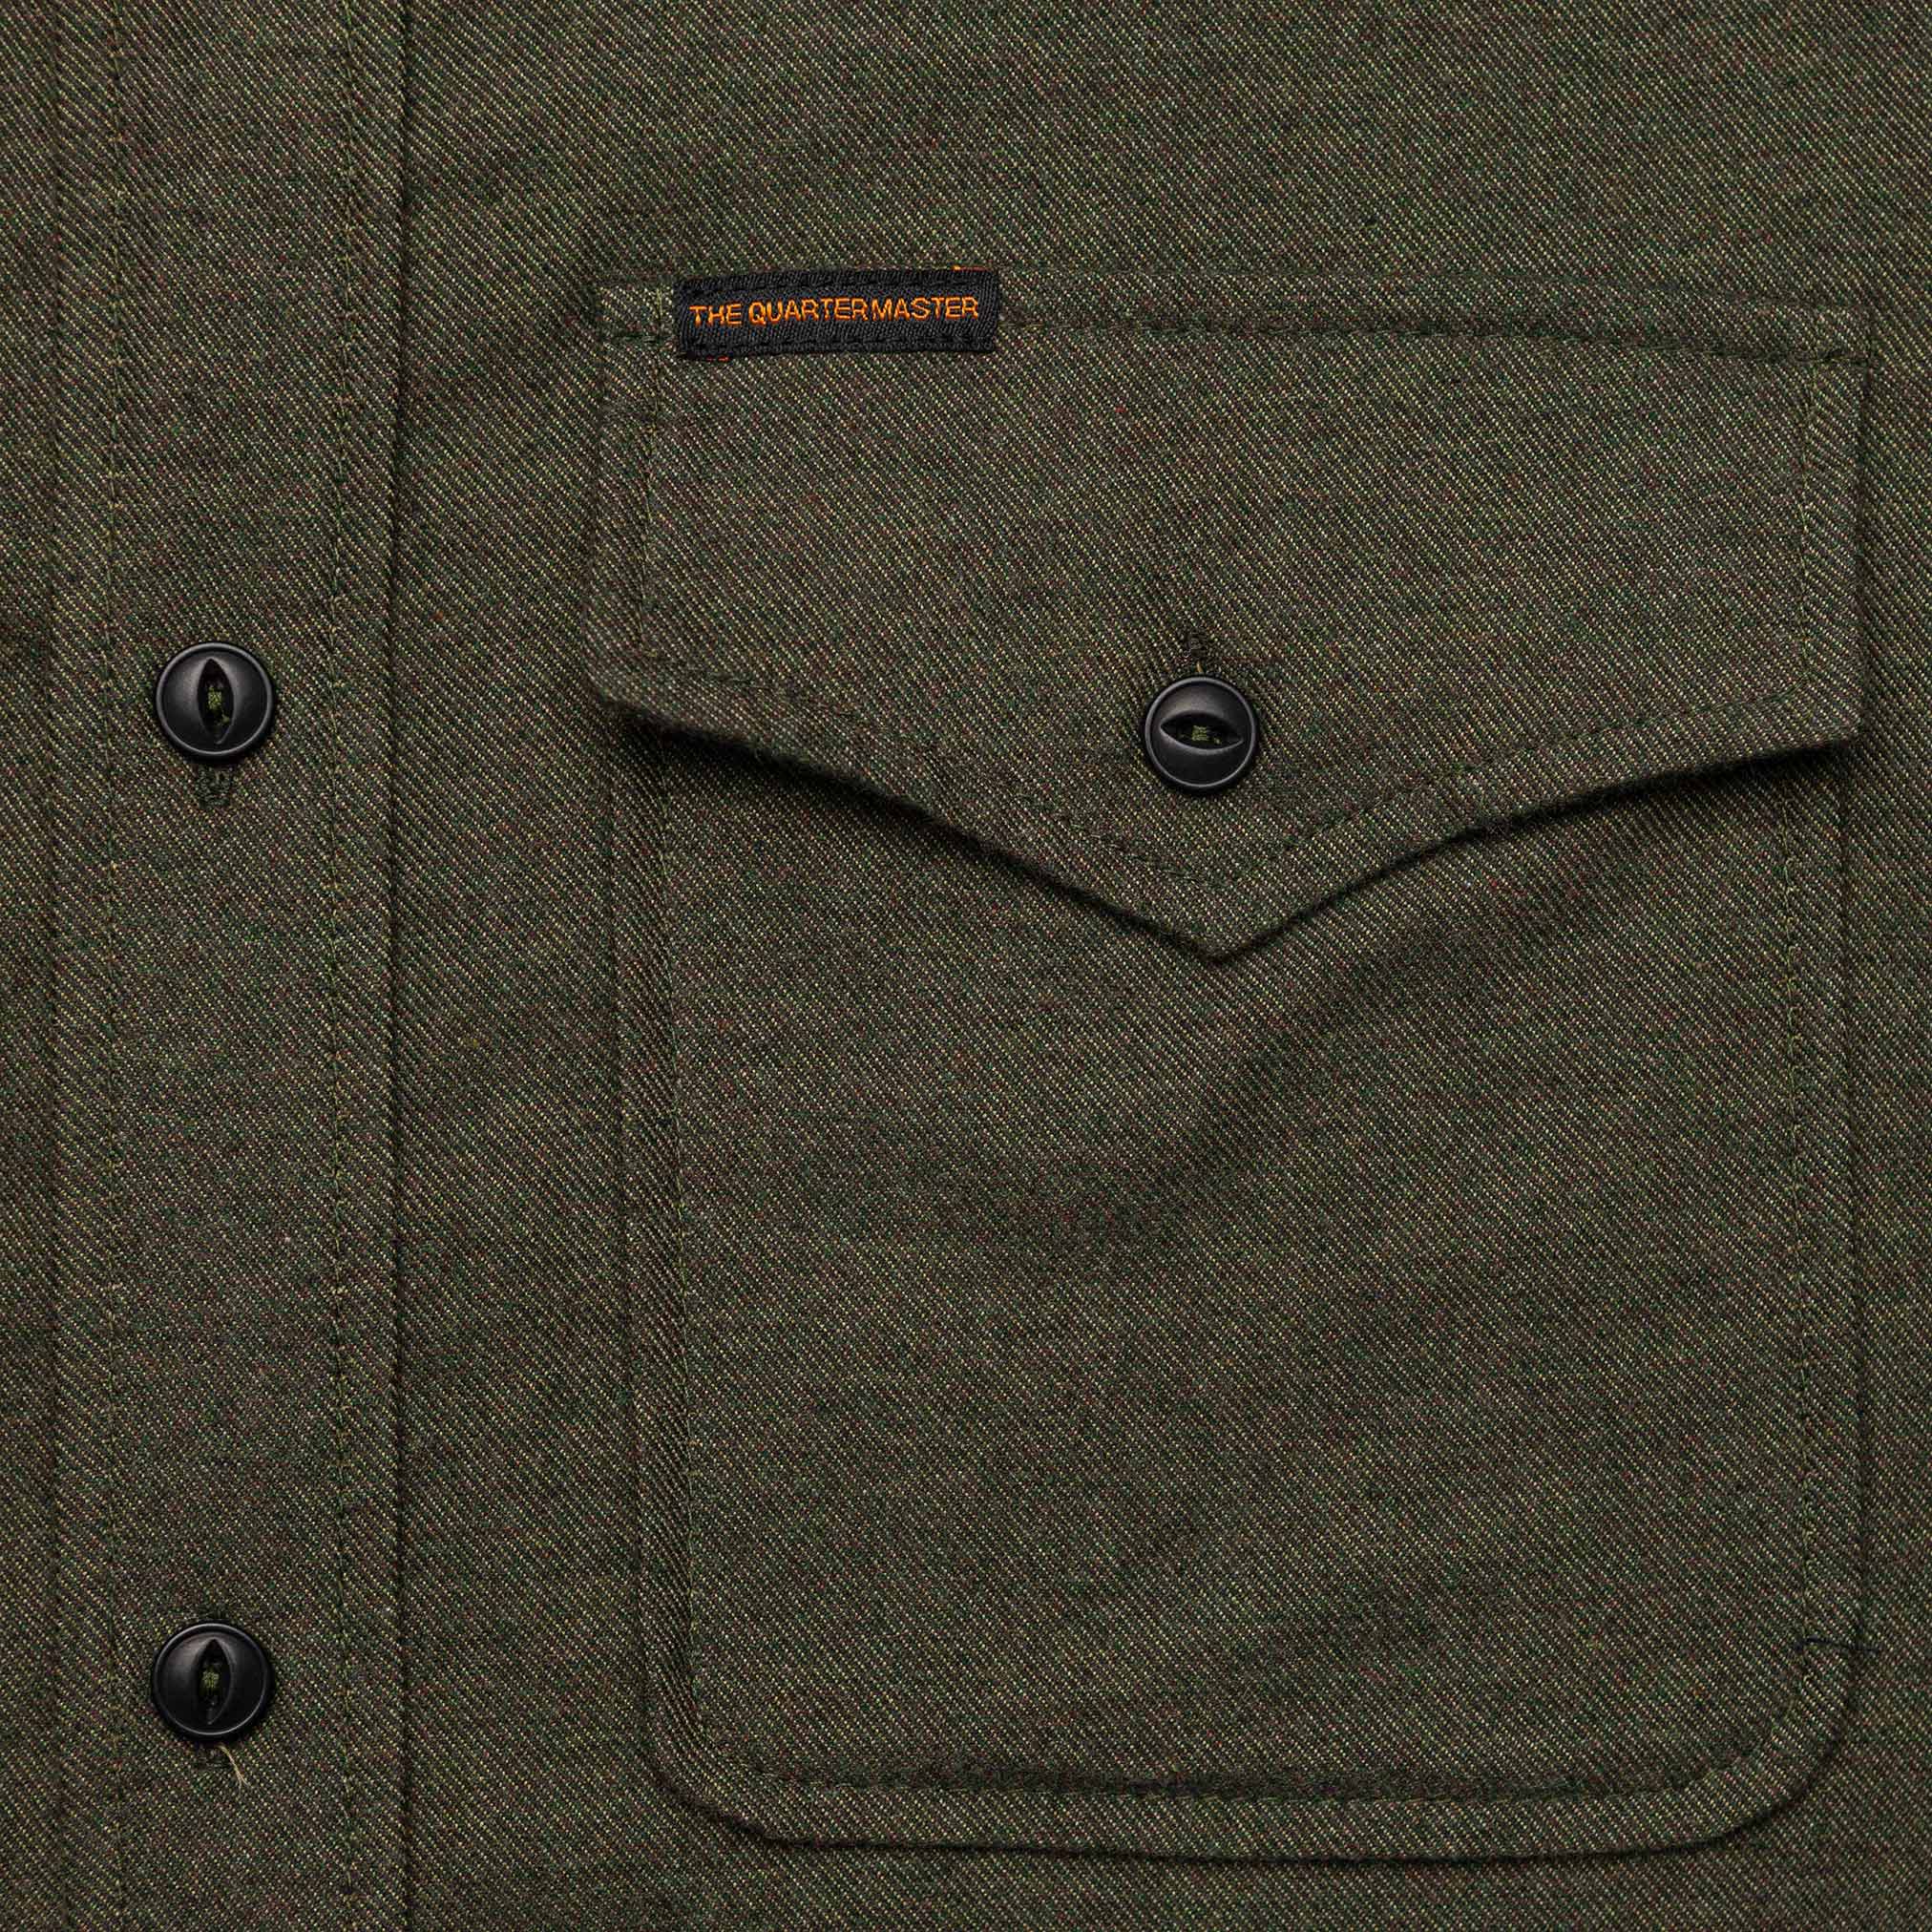 Flannel Shirt in Olive